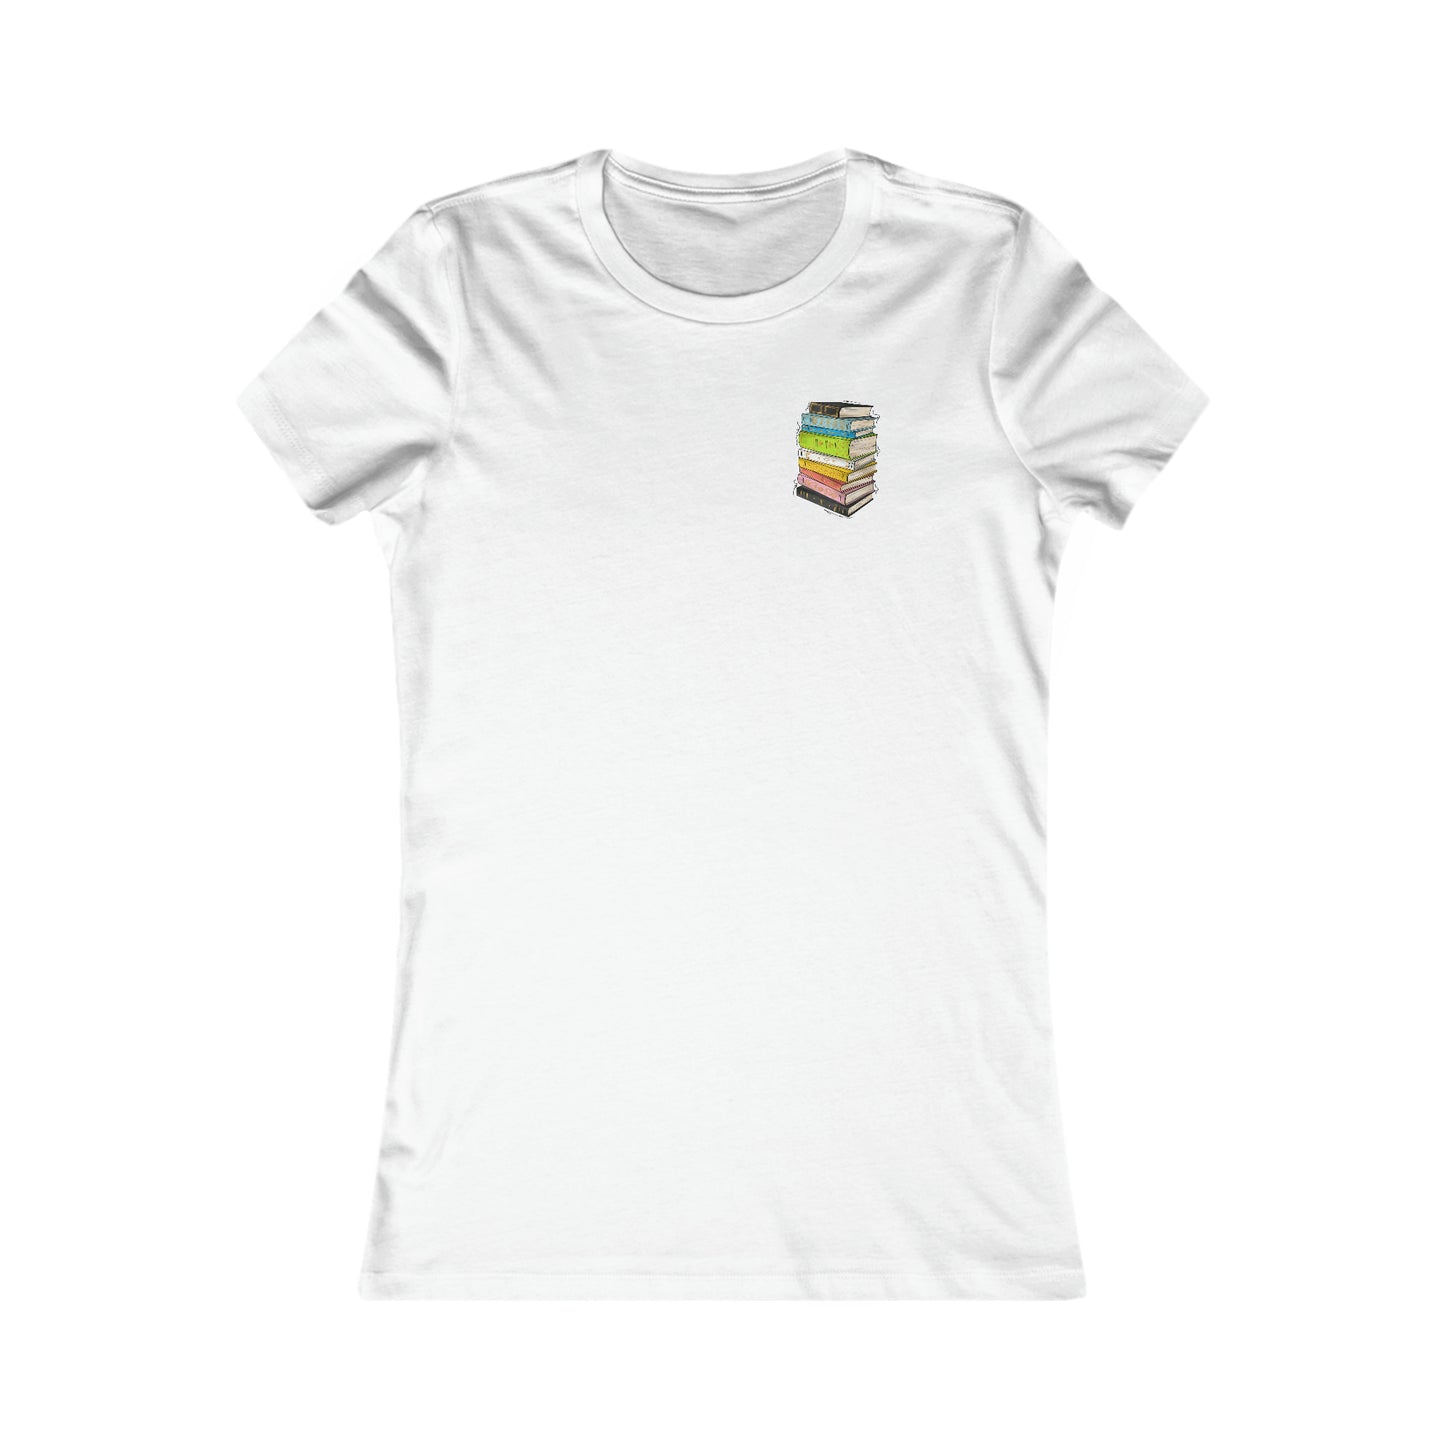 Queer Pride Flag Old Books - Women's T-Shirt